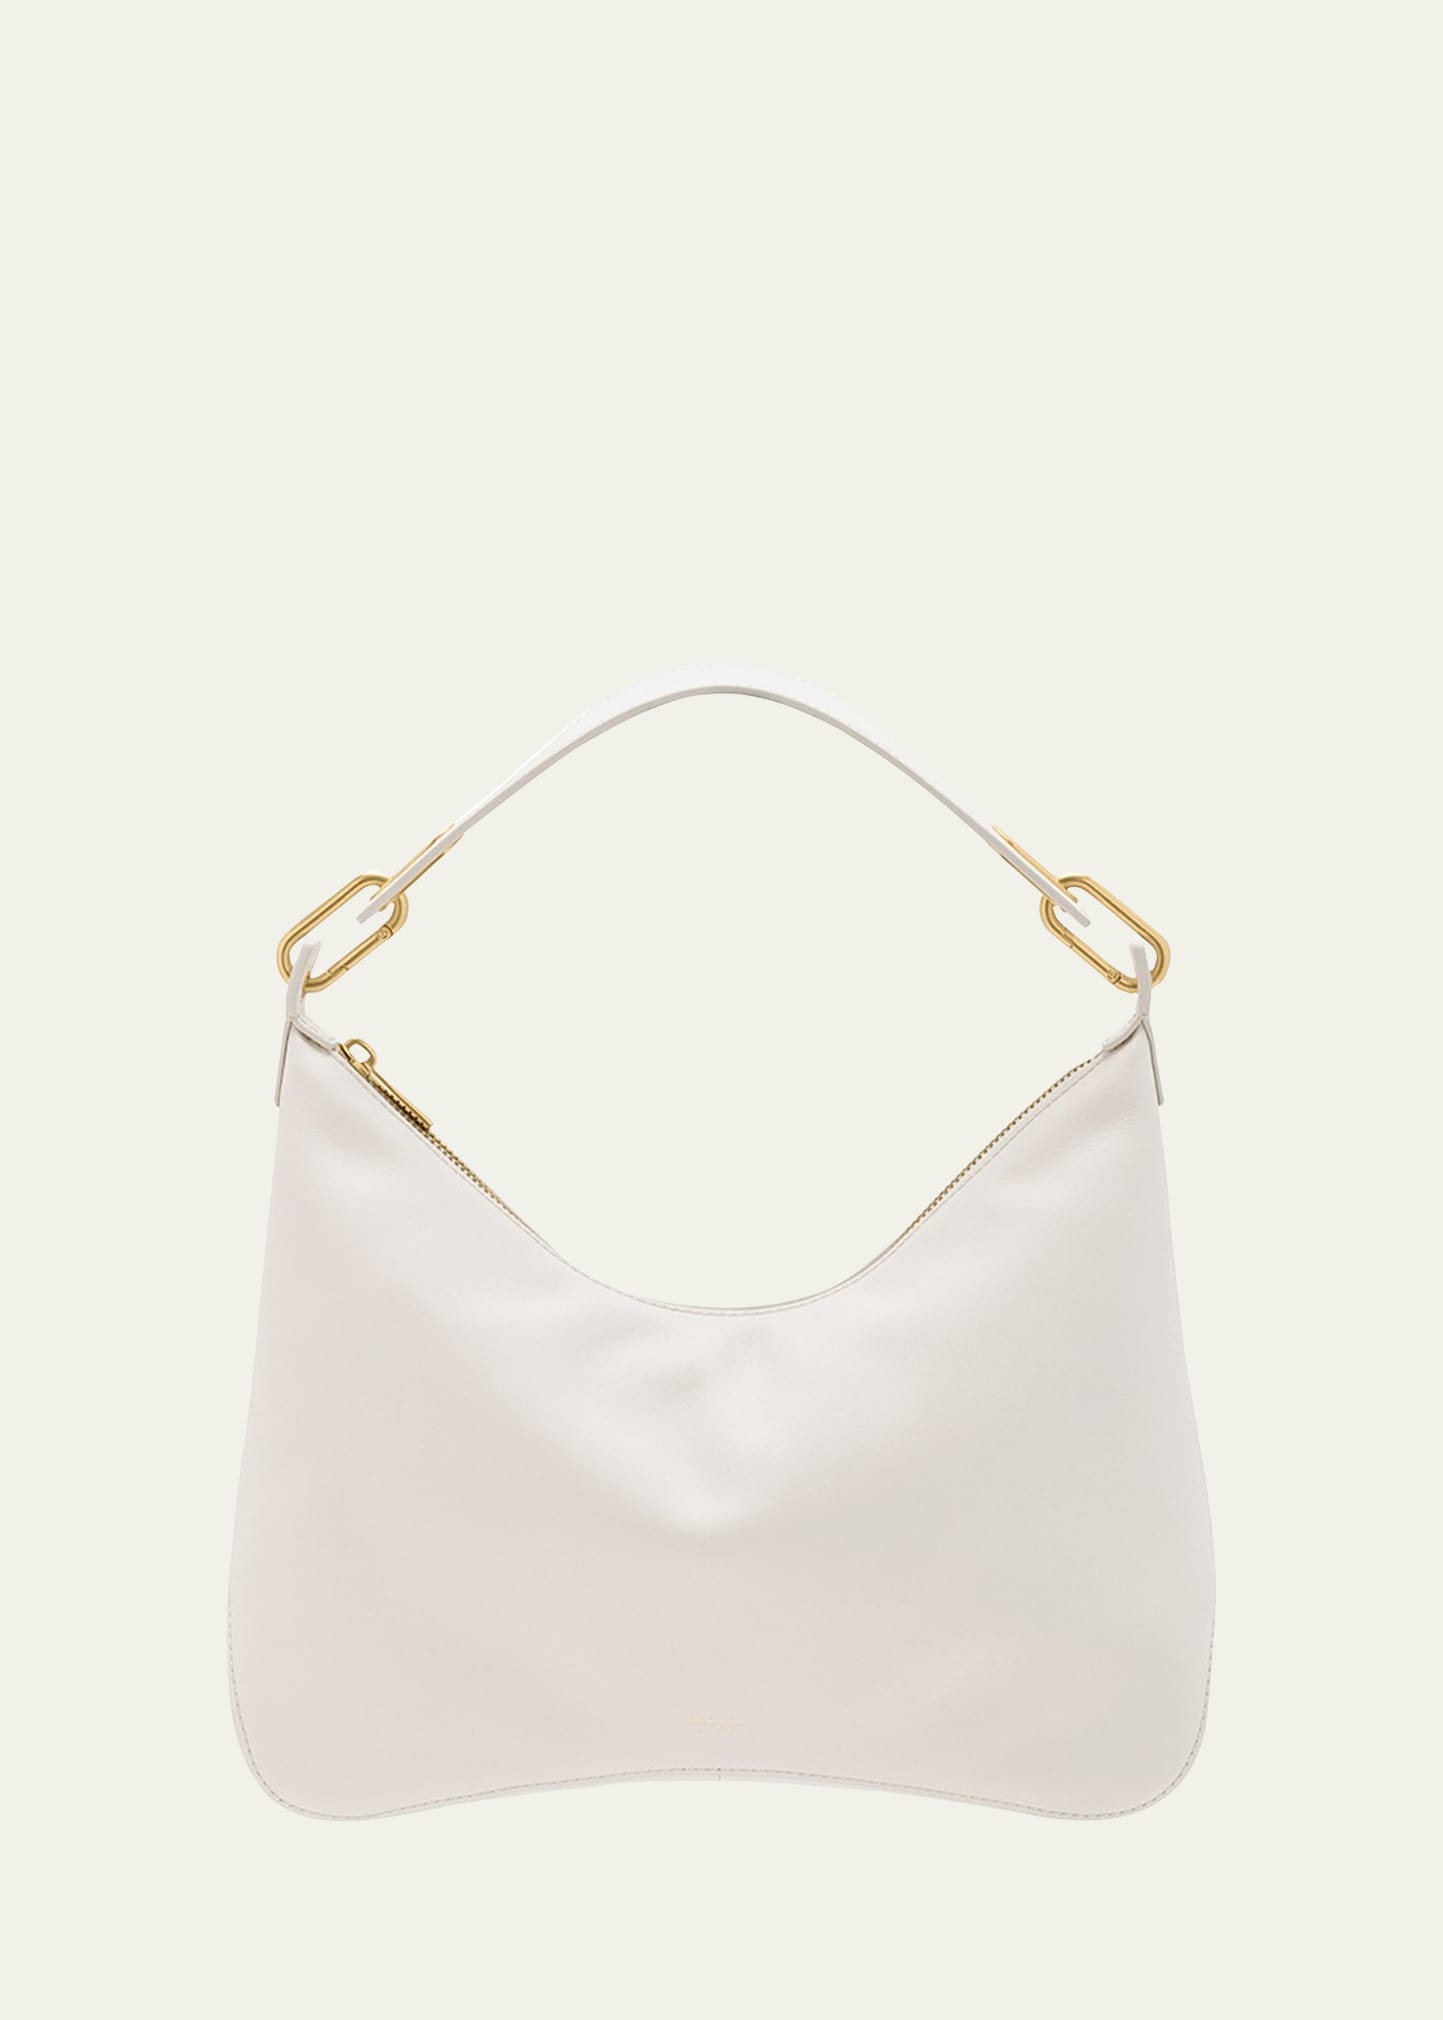 Oroton North Zip Leather Hobo Bag In Clotted Cream